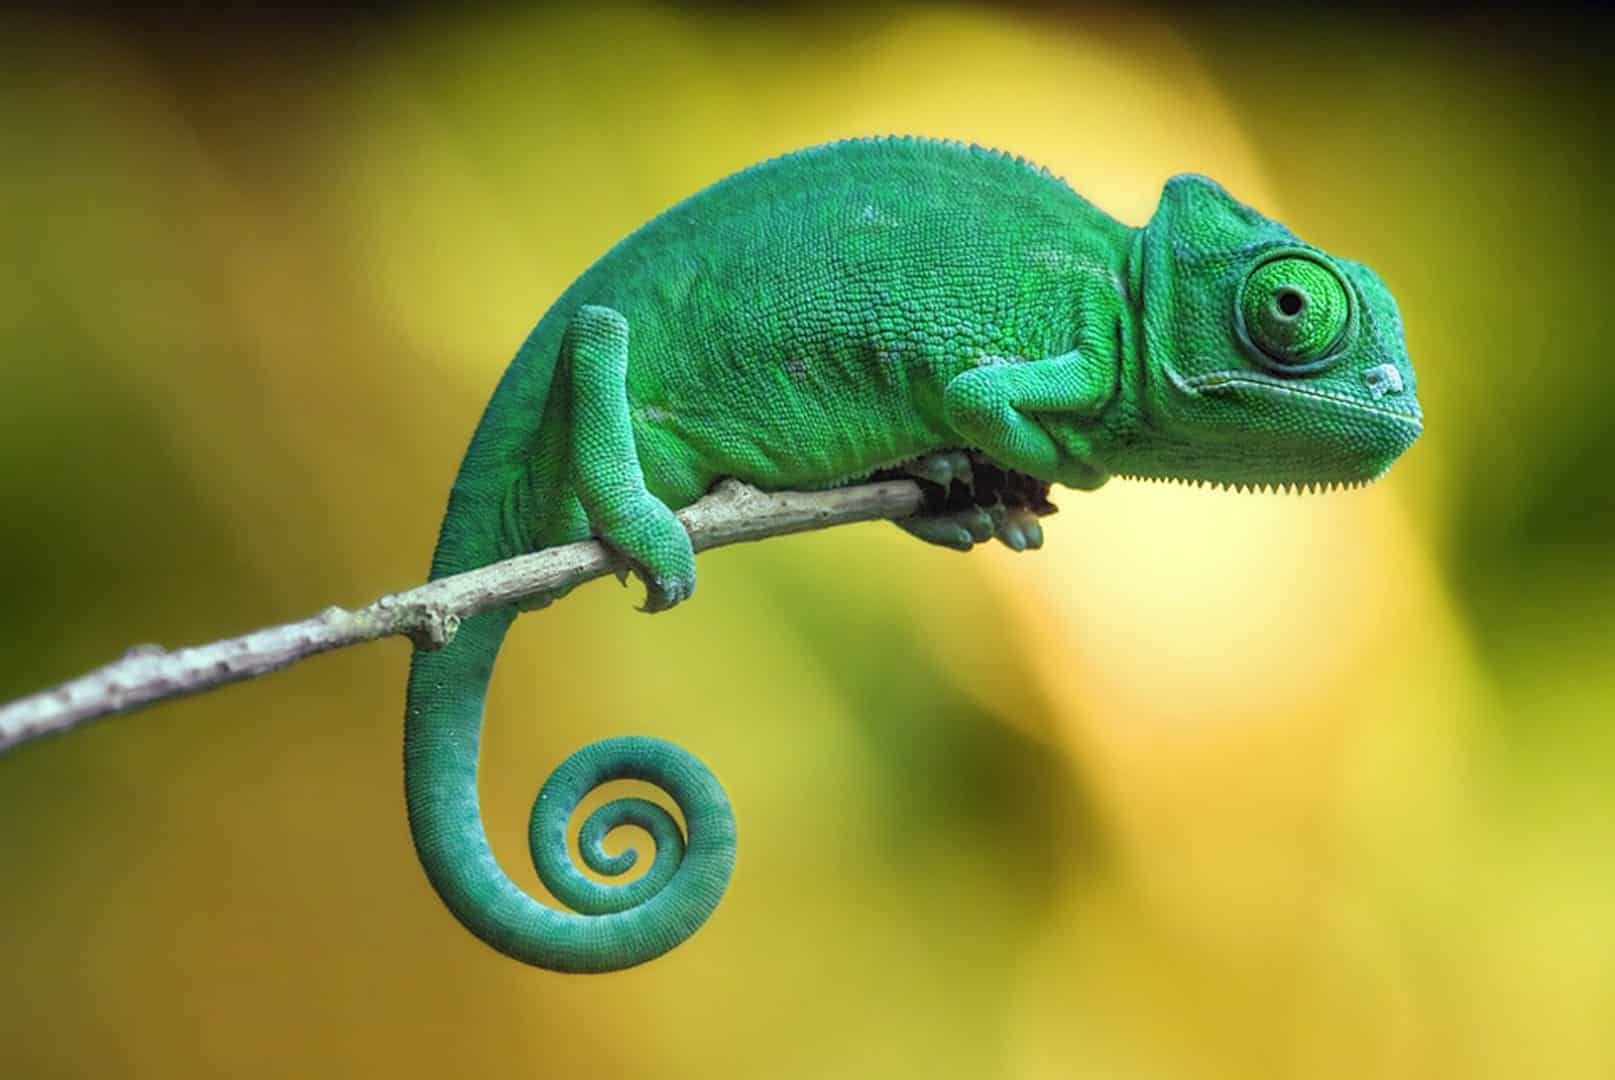 Chameleons change color mainly to communicate or regulate body temperature